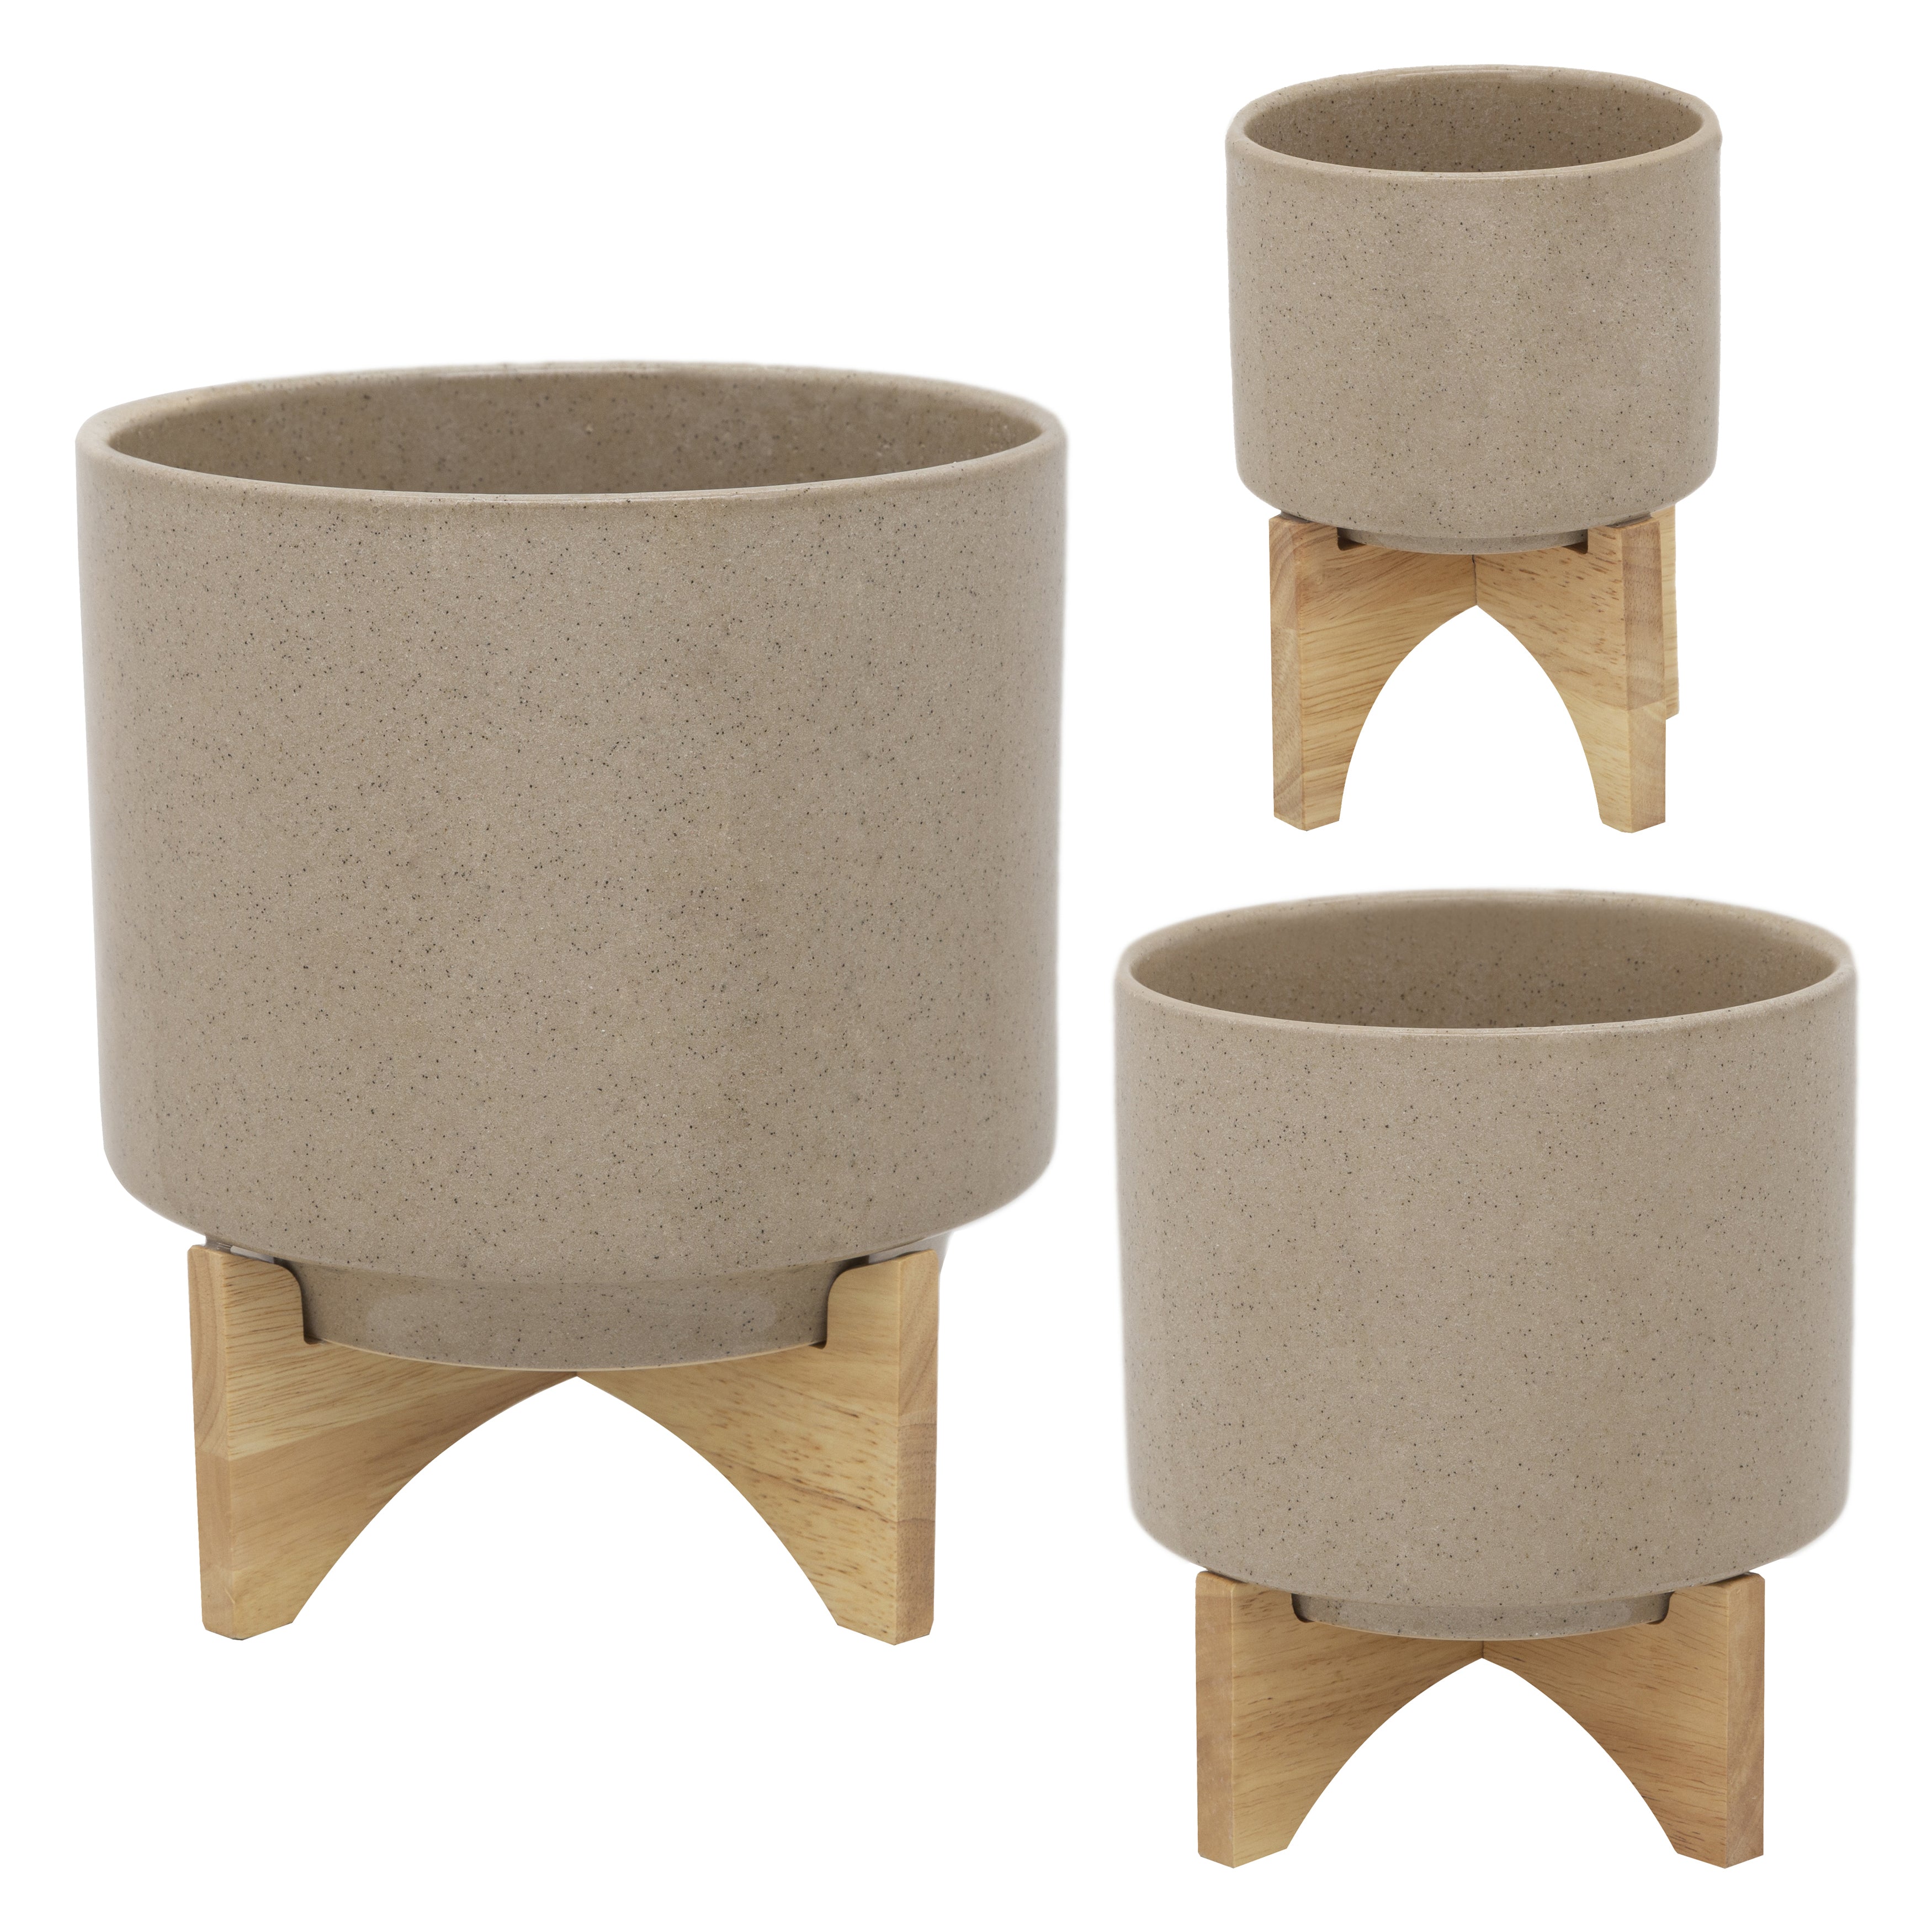 8" Planter with Wood Stand, Beige, Planters